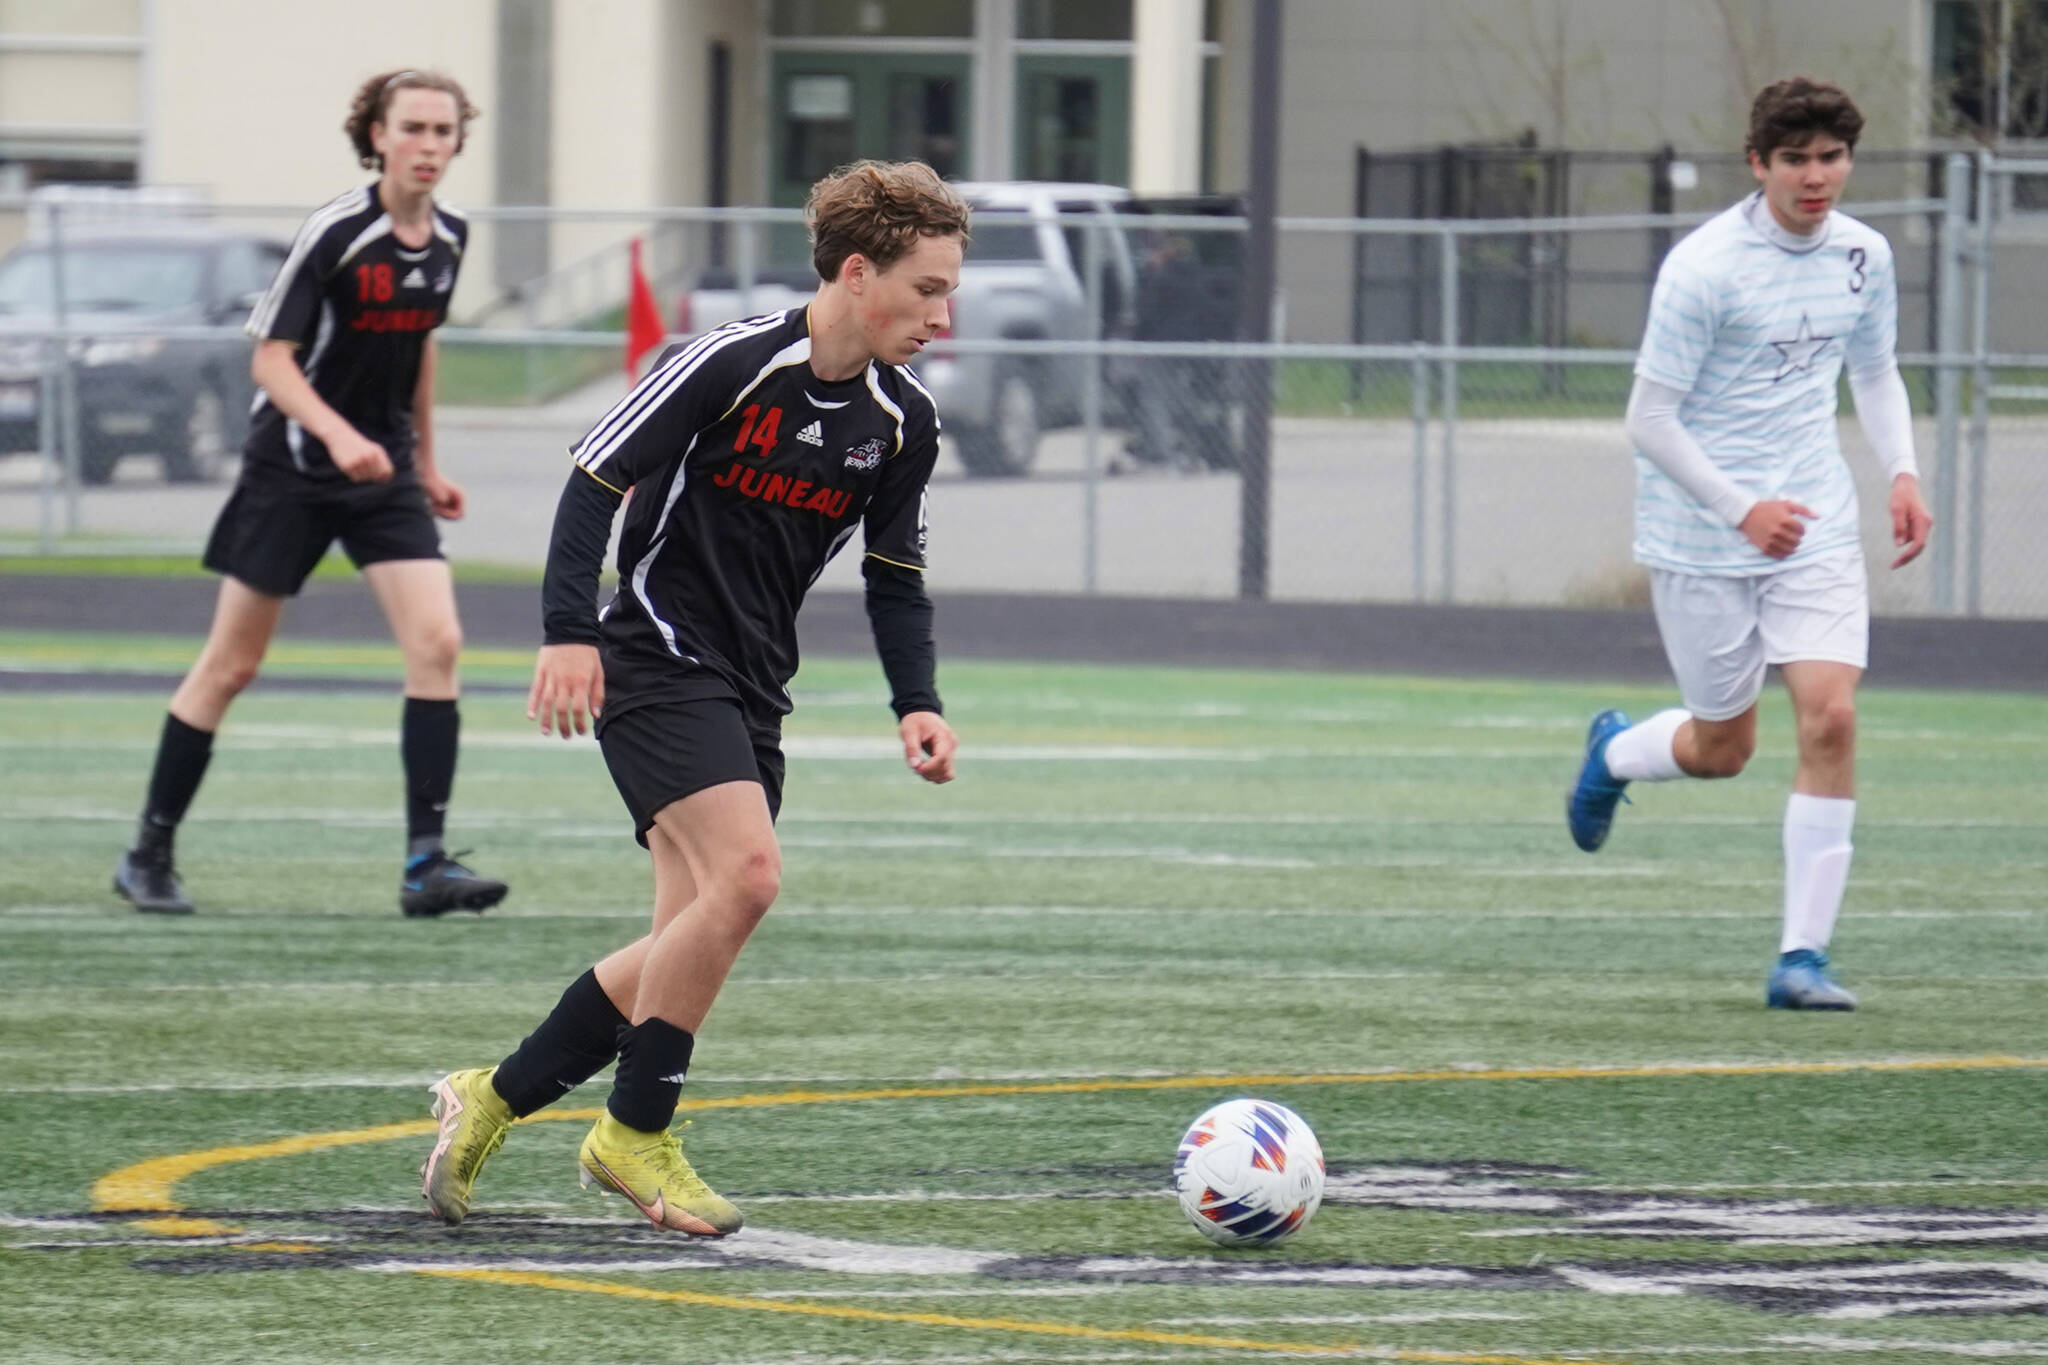 Juneau-Douglas’ Kai Ciambor moves at the ball during the Division II Soccer State Championship on Saturday, May 27, 2023, at West Anchorage High School in Anchorage, Alaska. (Jake Dye/Peninsula Clarion)